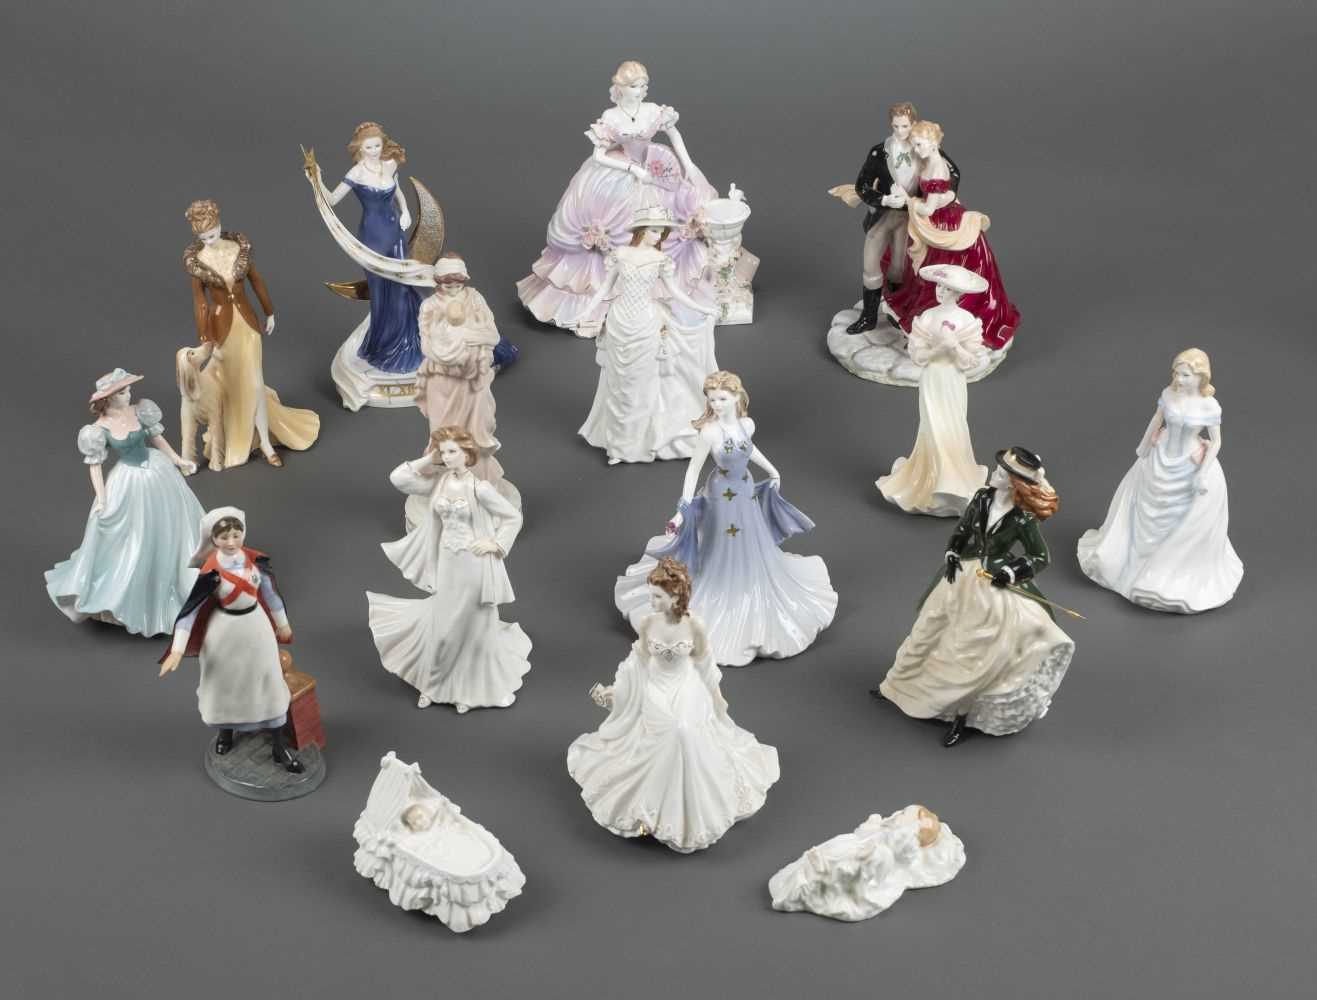 Lot 24 - Figurines. A large collection of Royal